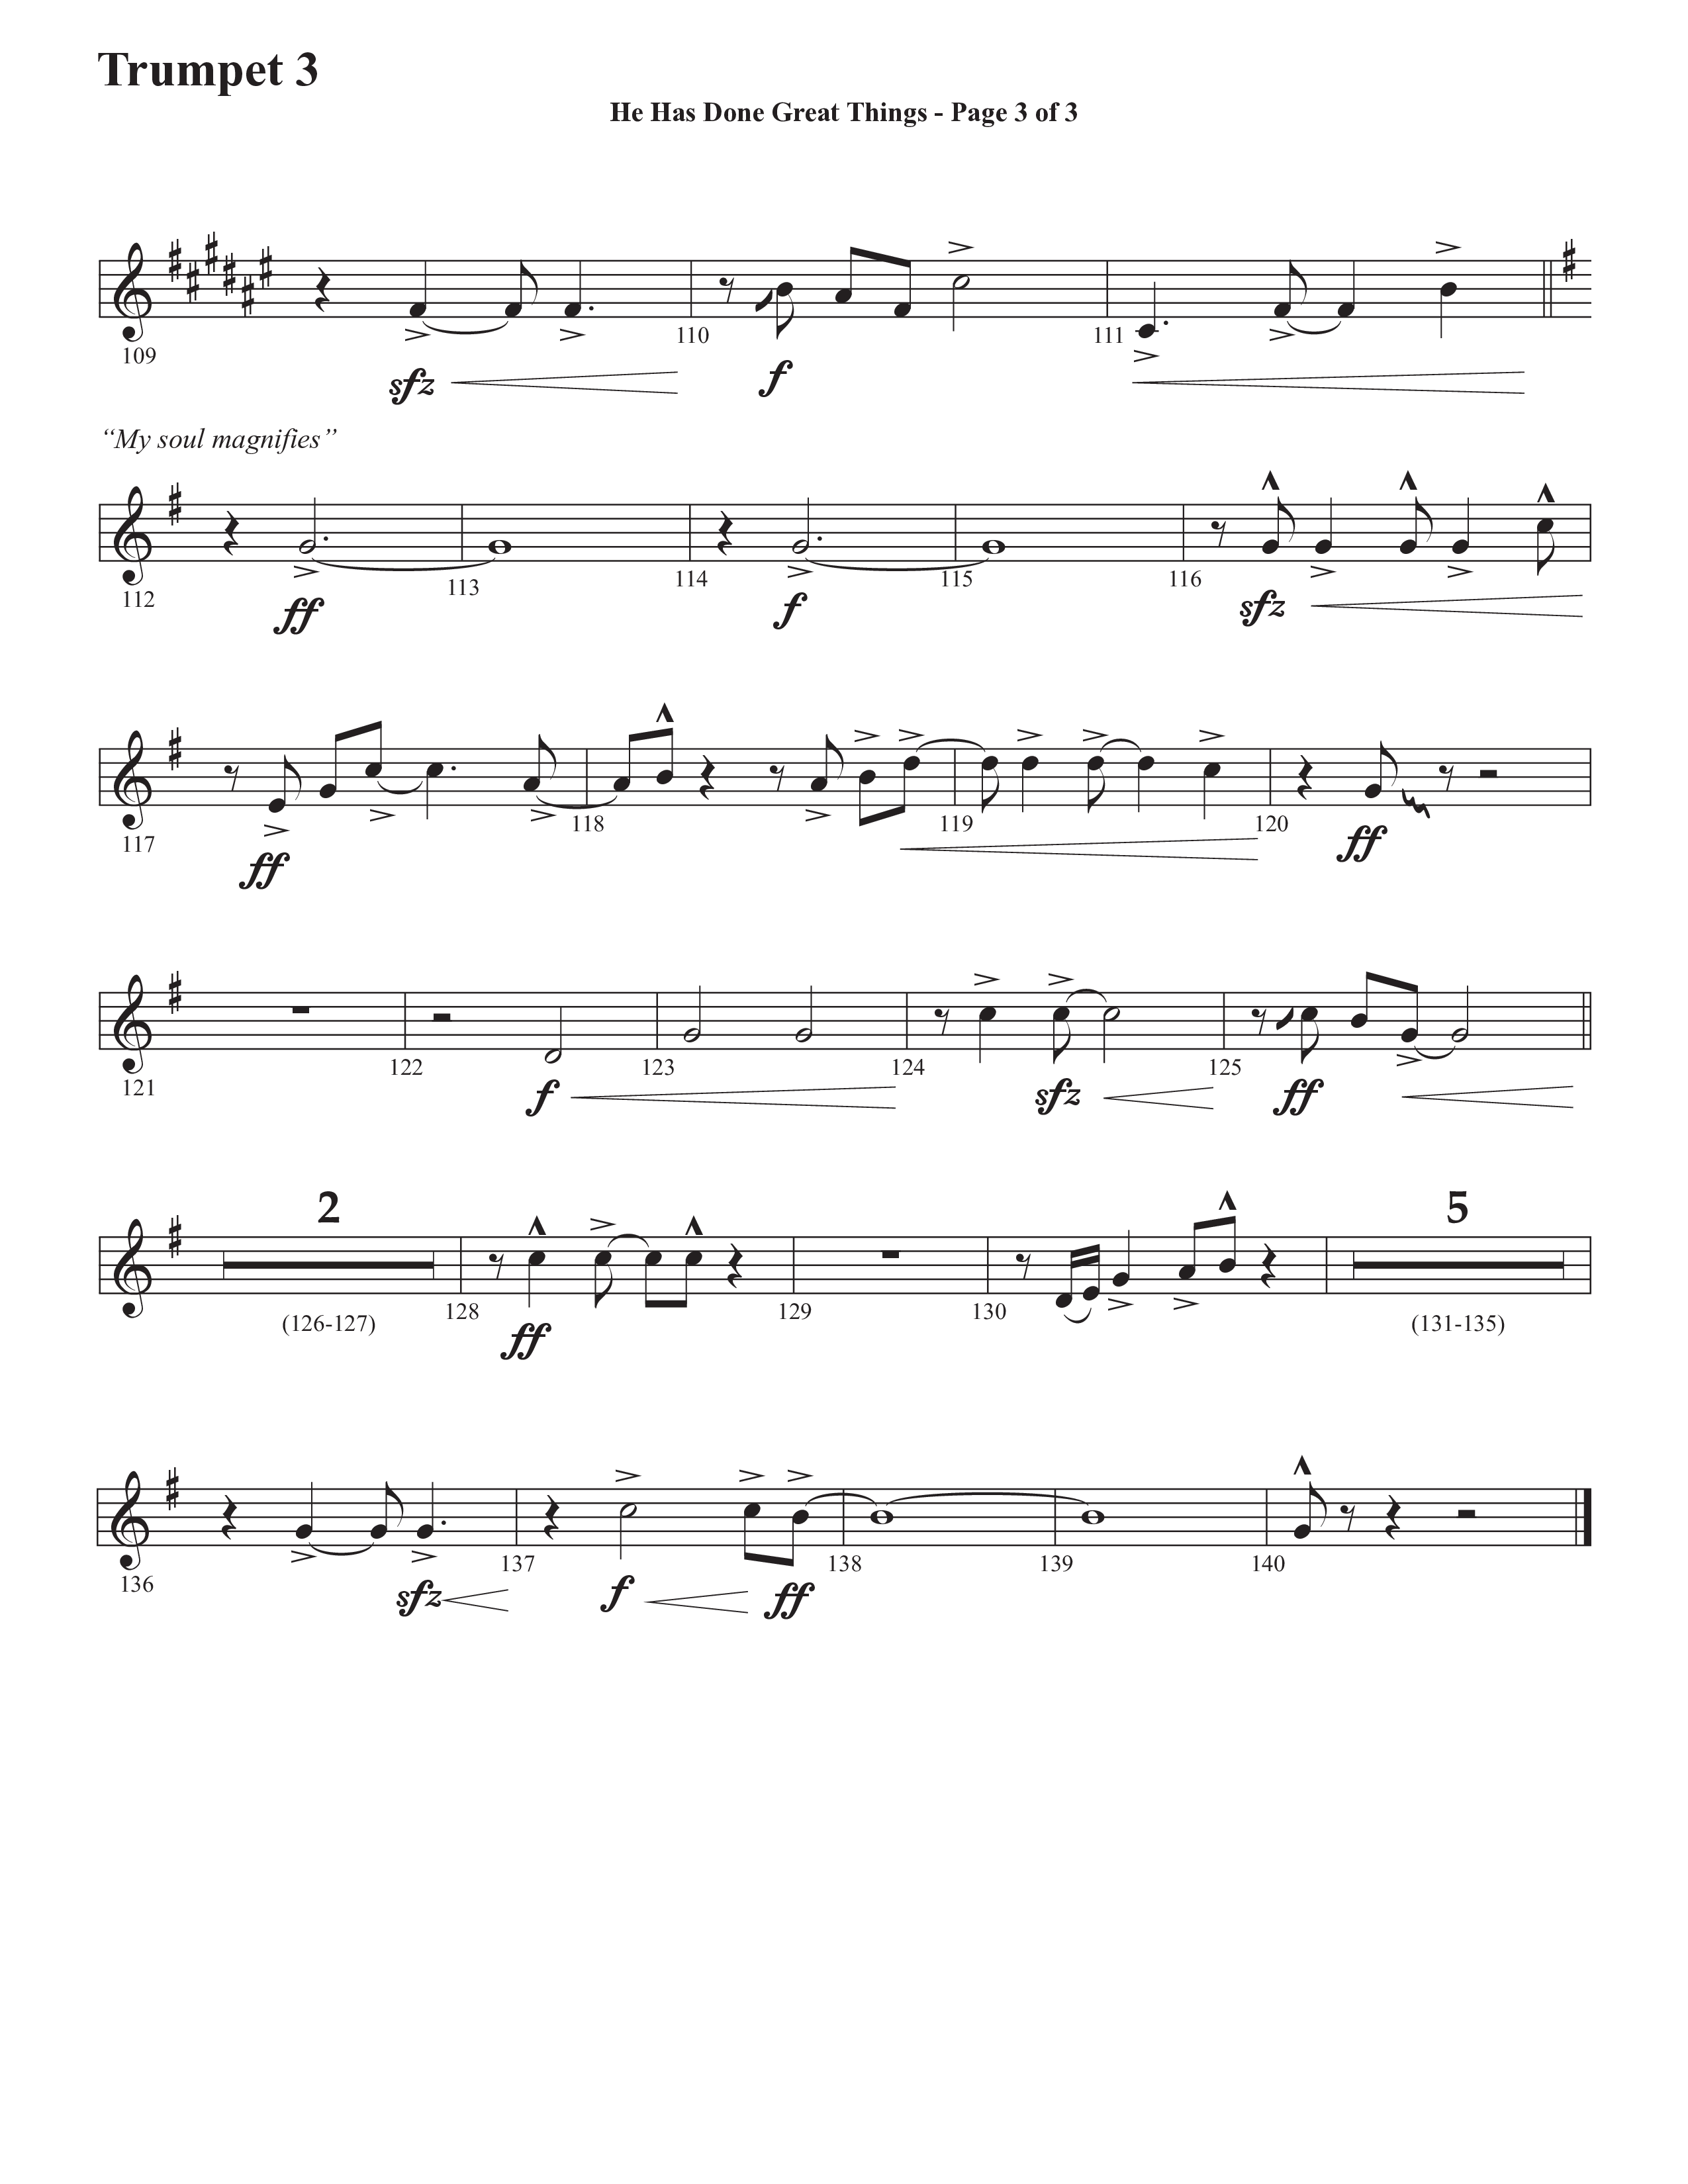 He Has Done Great Things (The Magnificat) (Choral Anthem SATB) Trumpet 3 (Semsen Music / Arr. John Bolin / Orch. Cliff Duren)